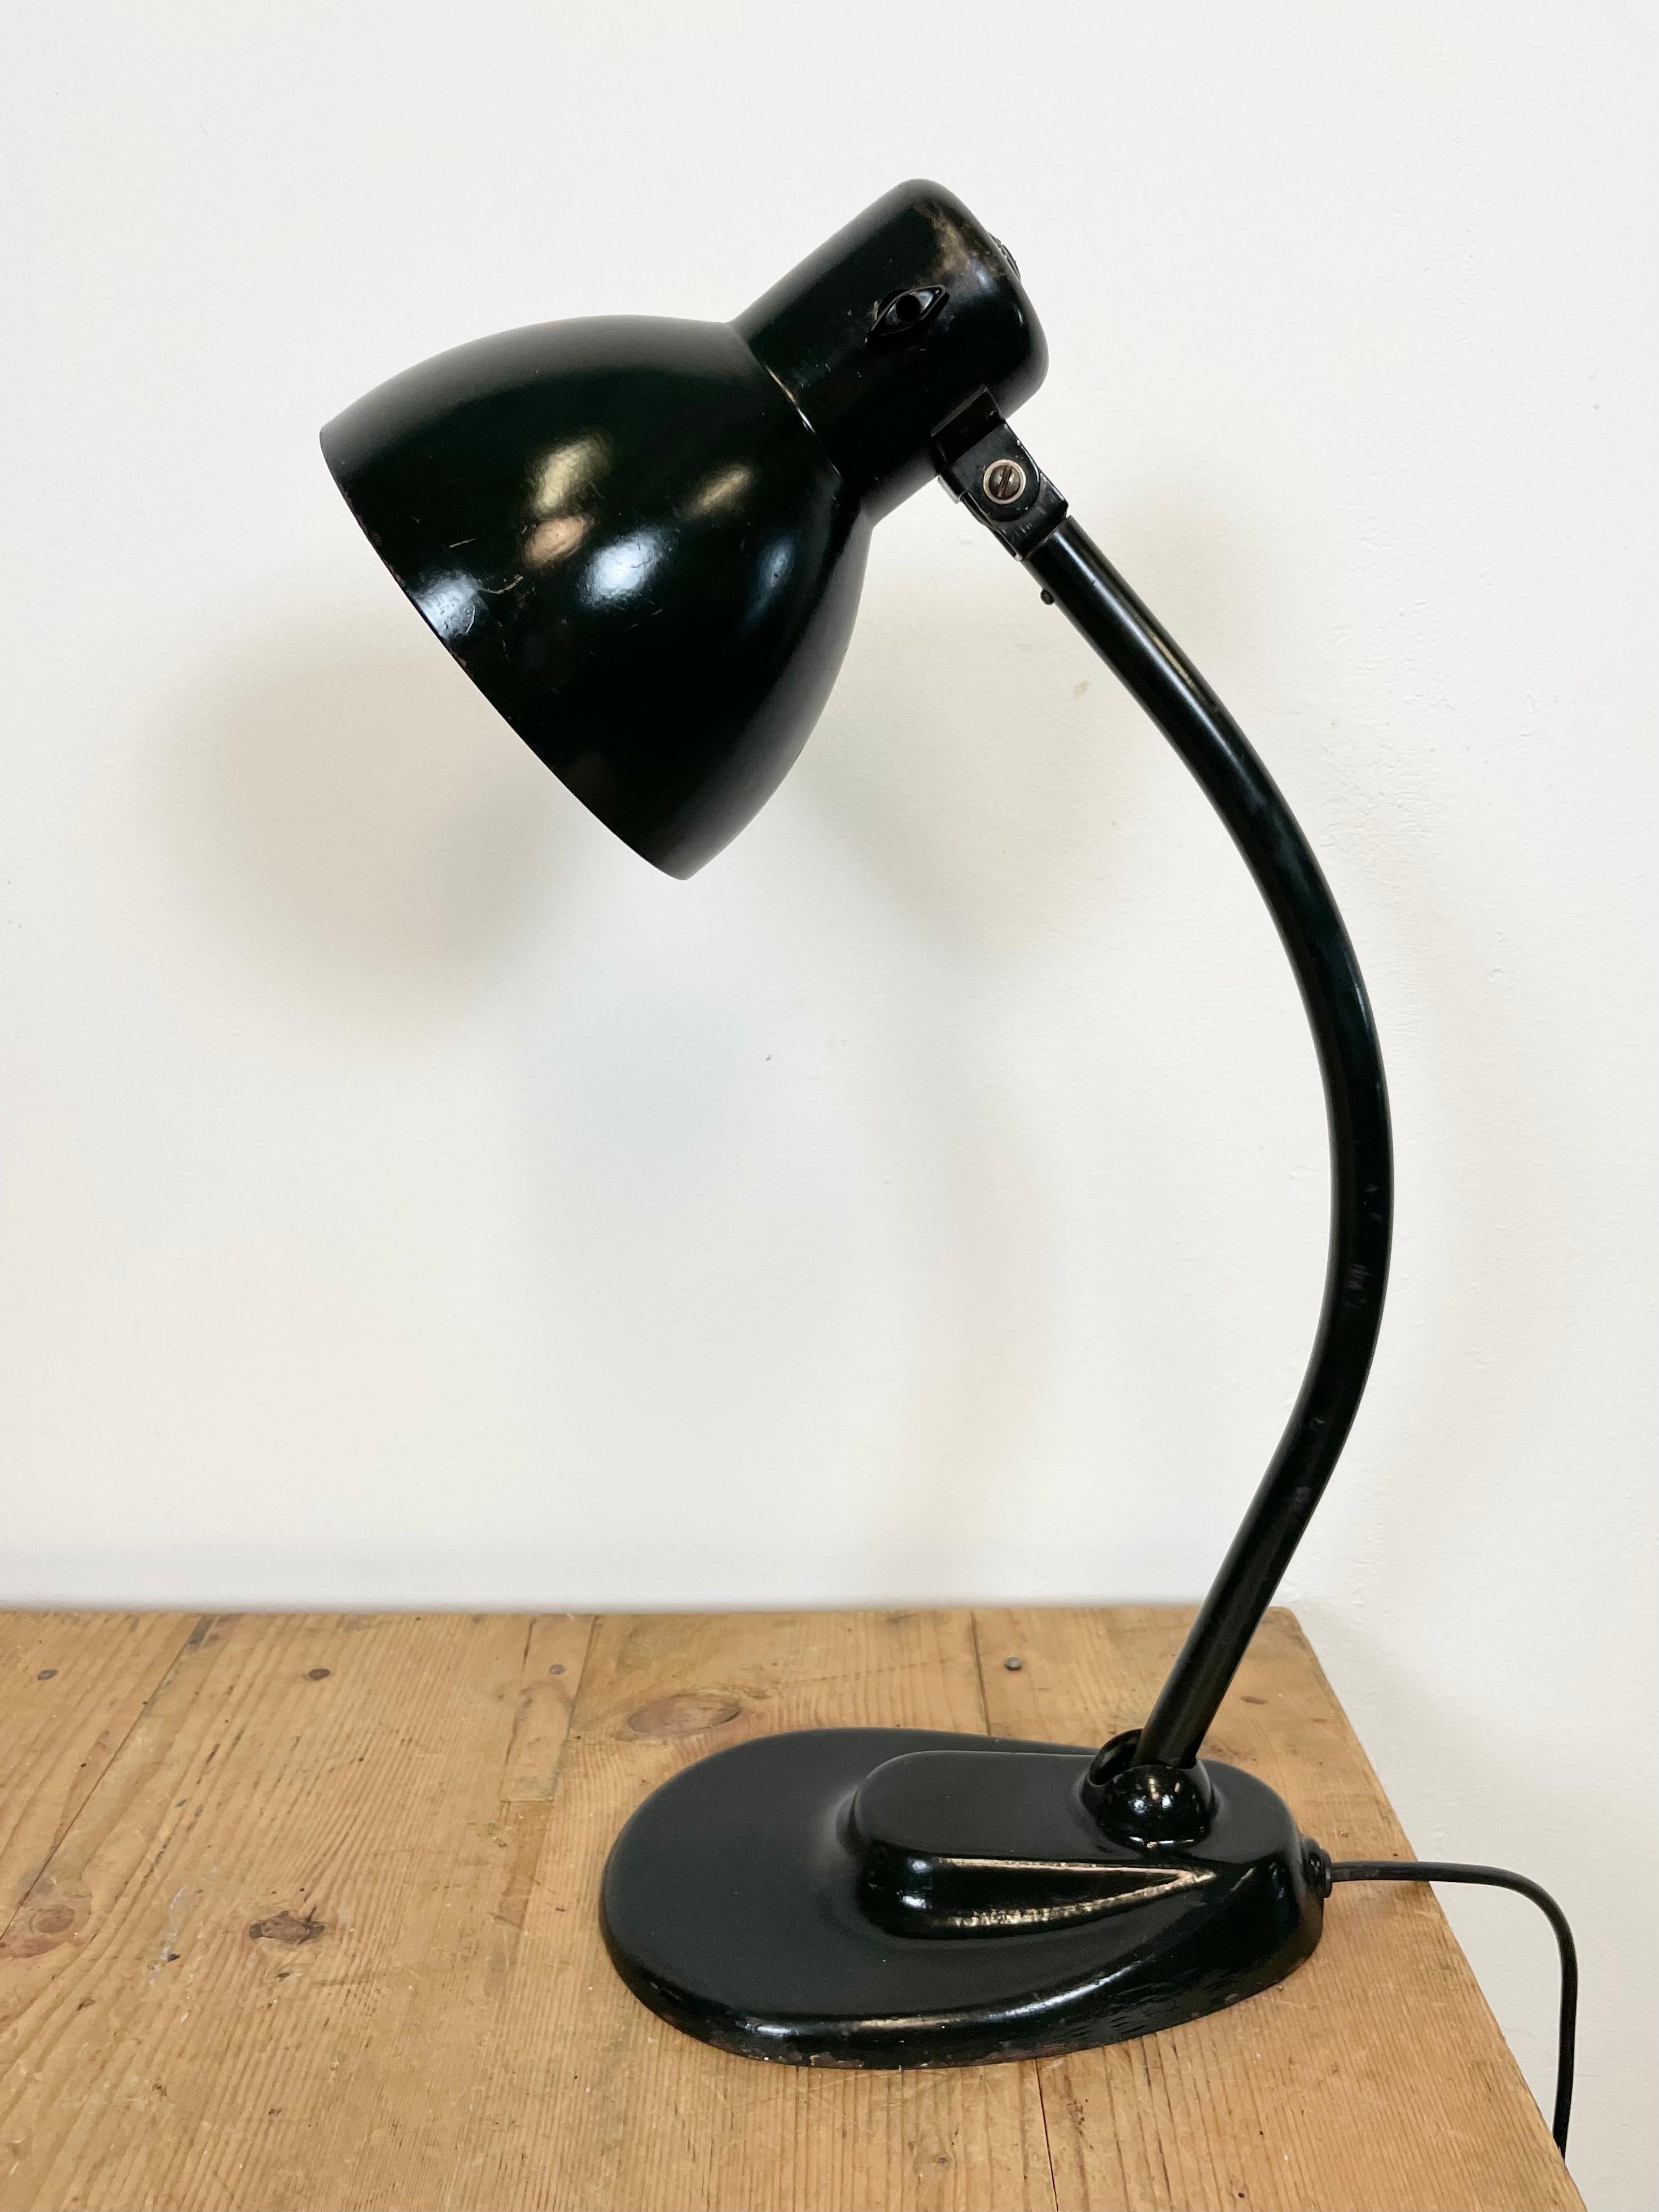 Vintage Bauhaus classic dark green KANDEM desk lamp made in Germany during the 1930s. 
- Cast iron base
- Curved adjustable arm
- On/Off switch on the shade
- Takes E27 fitting bulbs
- Weight : 2,1 kg
- Shade diameter : 14 cm